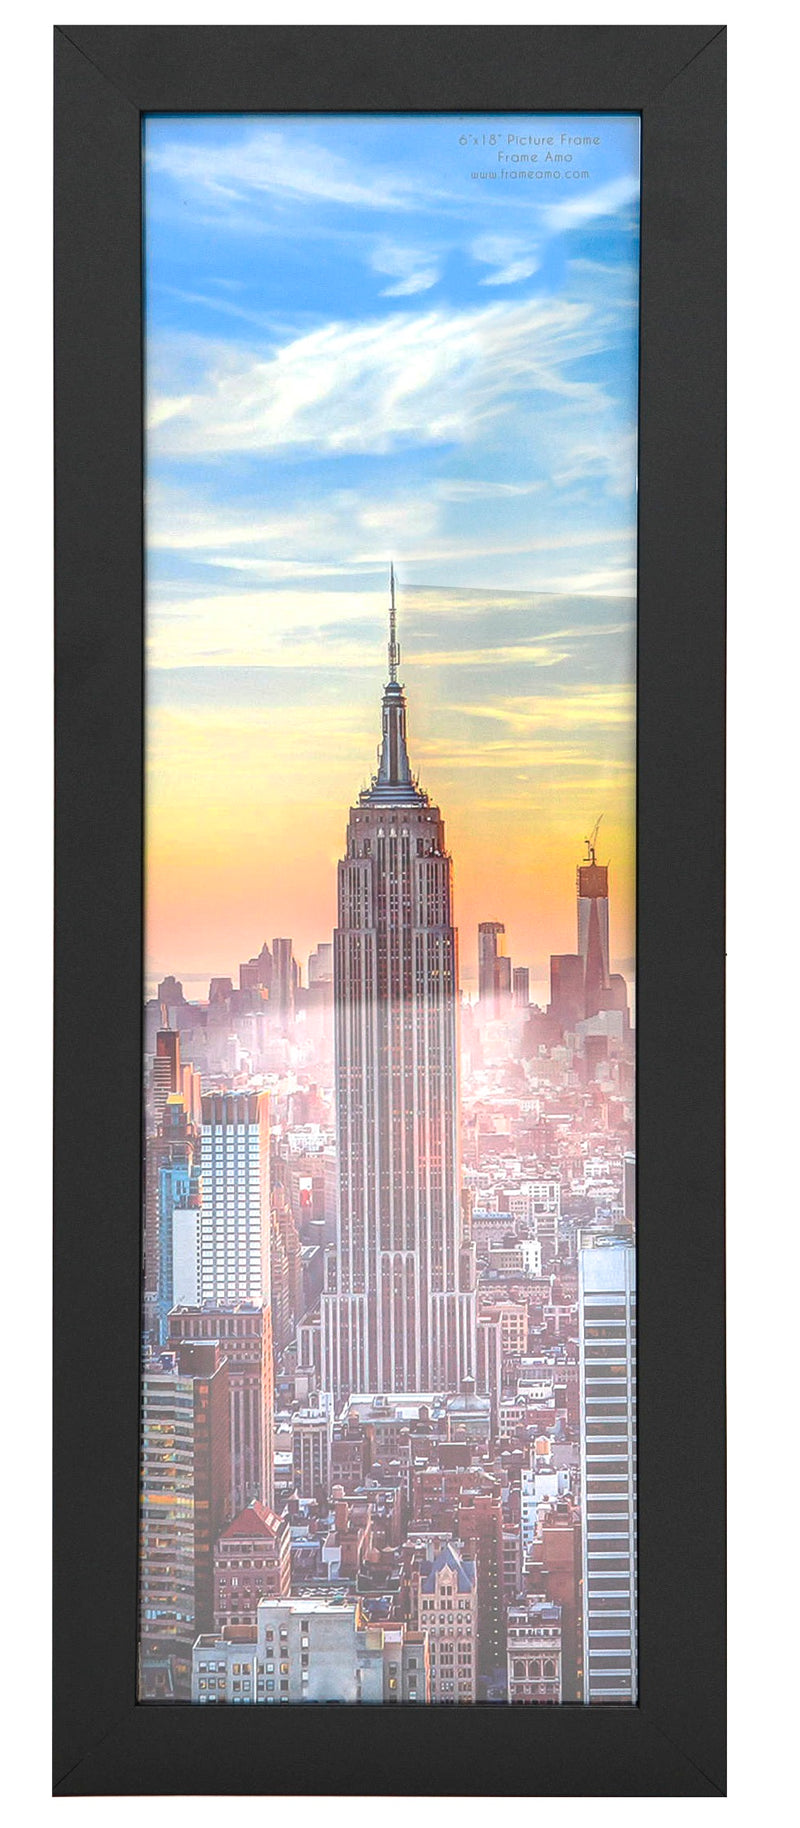 6x18 Black Modern Picture or Poster Frame, 1 inch Wide Border, Acrylic Front